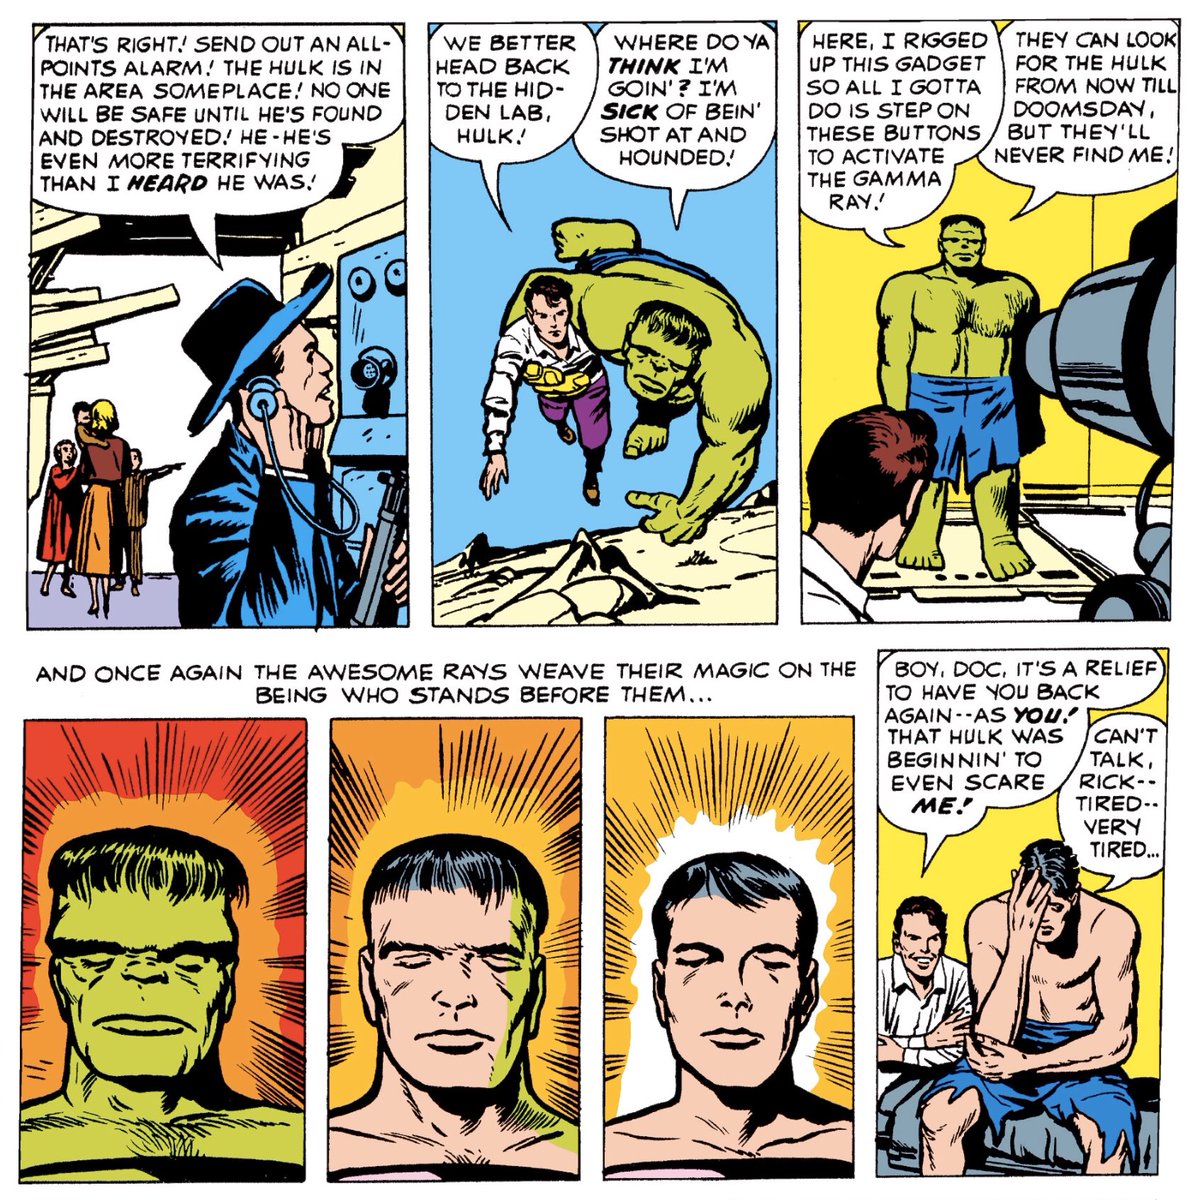 ...and by issue #4 Banner requires a gamma ray machine to transform back-and-forth into the Hulk. This constant state of flux and inconsistency eventually resulted in HULK’s solo title being canceled after 6-issues before being given a 2nd chance at life in TALES TO ASTONISH...